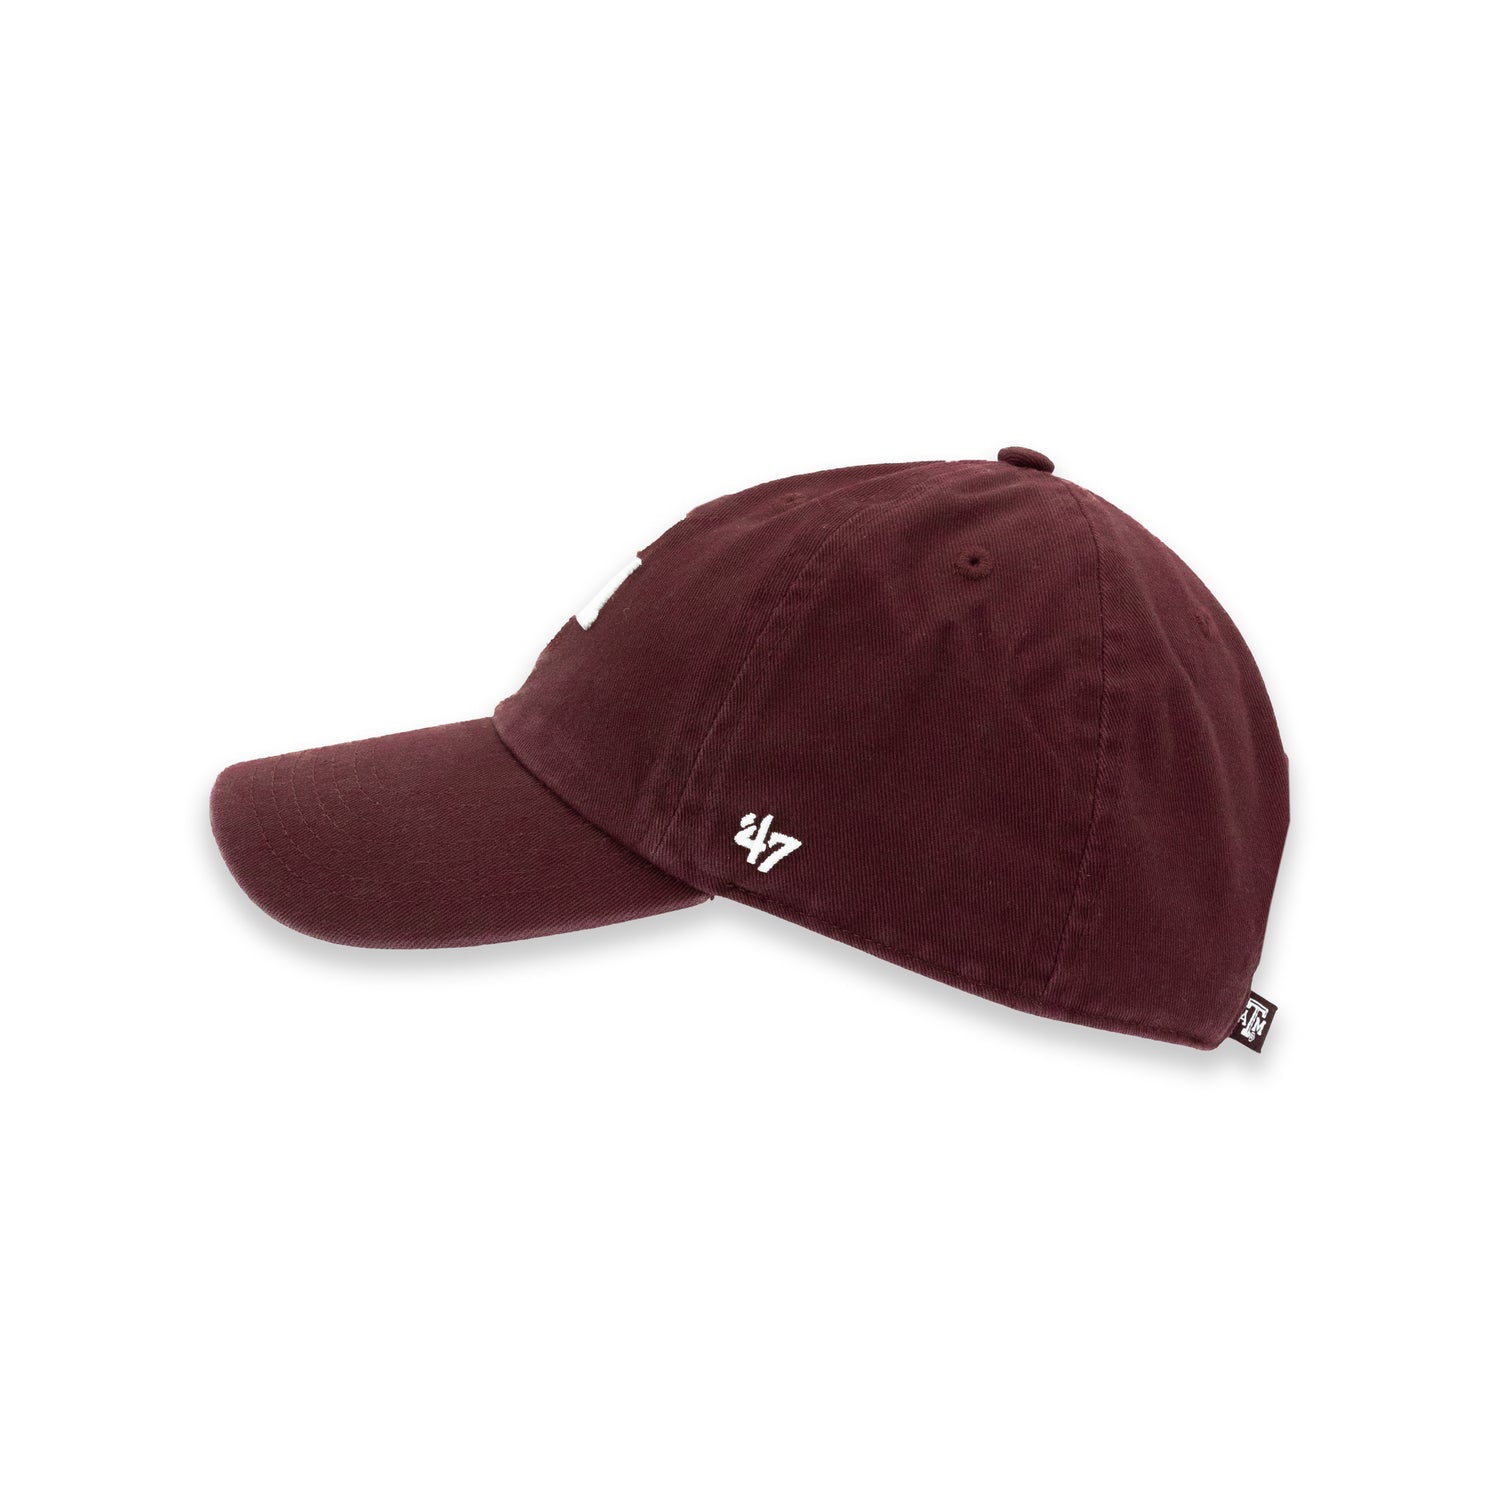 Texas A&M '47 Brand Youth Clean Up Cap